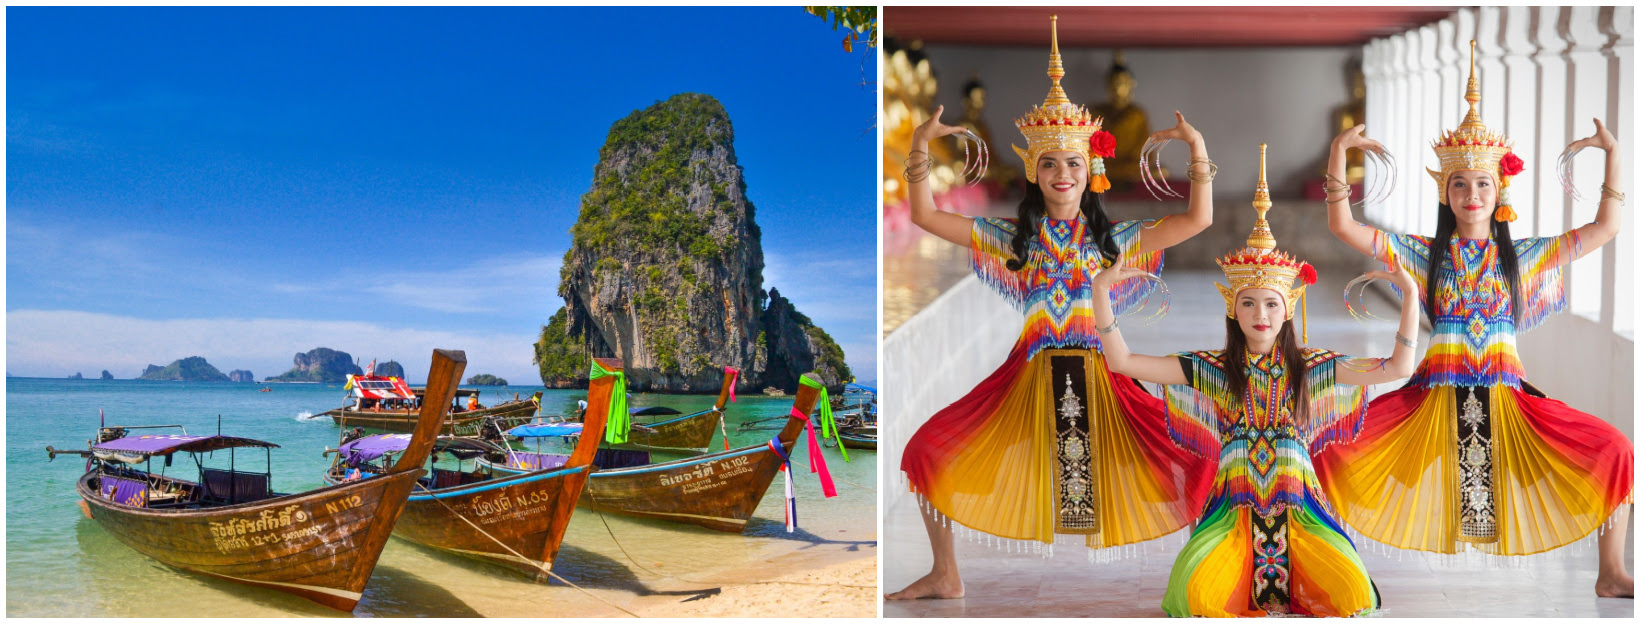 Petition from Thailand’s Tourism Sector seeks to reopen Thailand safely